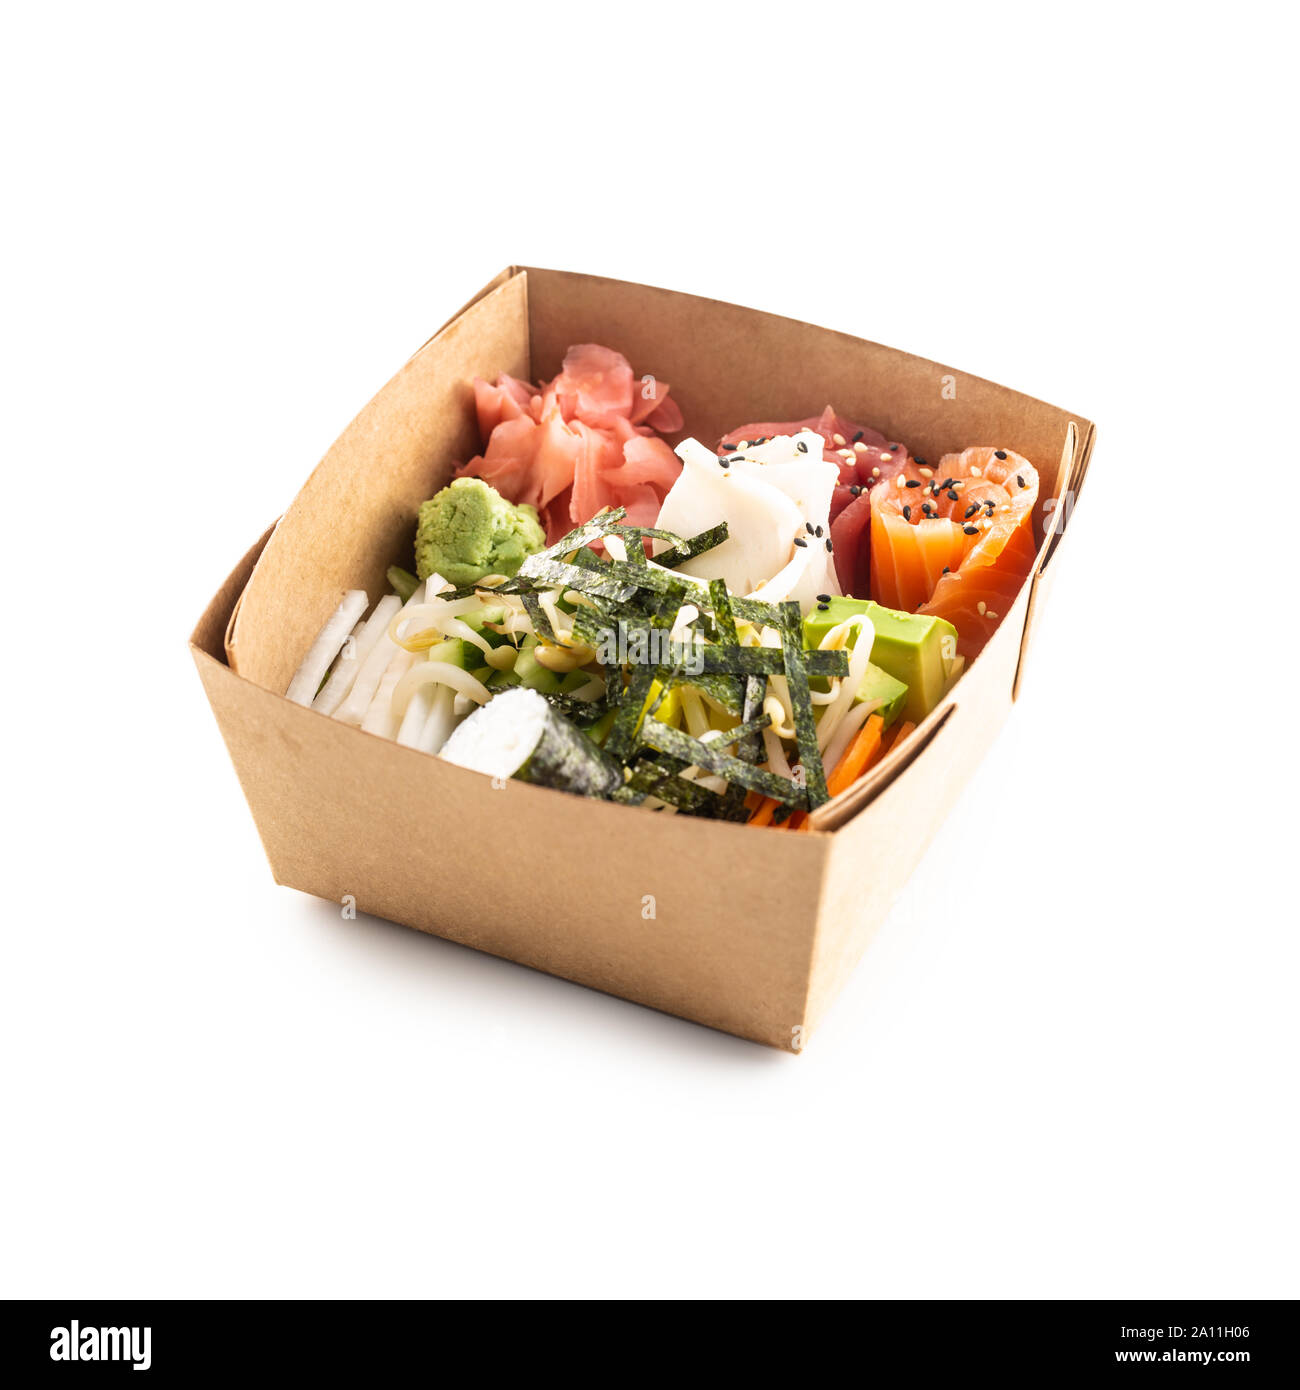 https://c8.alamy.com/comp/2A11H06/japanese-asian-meal-in-a-box-of-recycled-paper-isolated-on-white-background-2A11H06.jpg